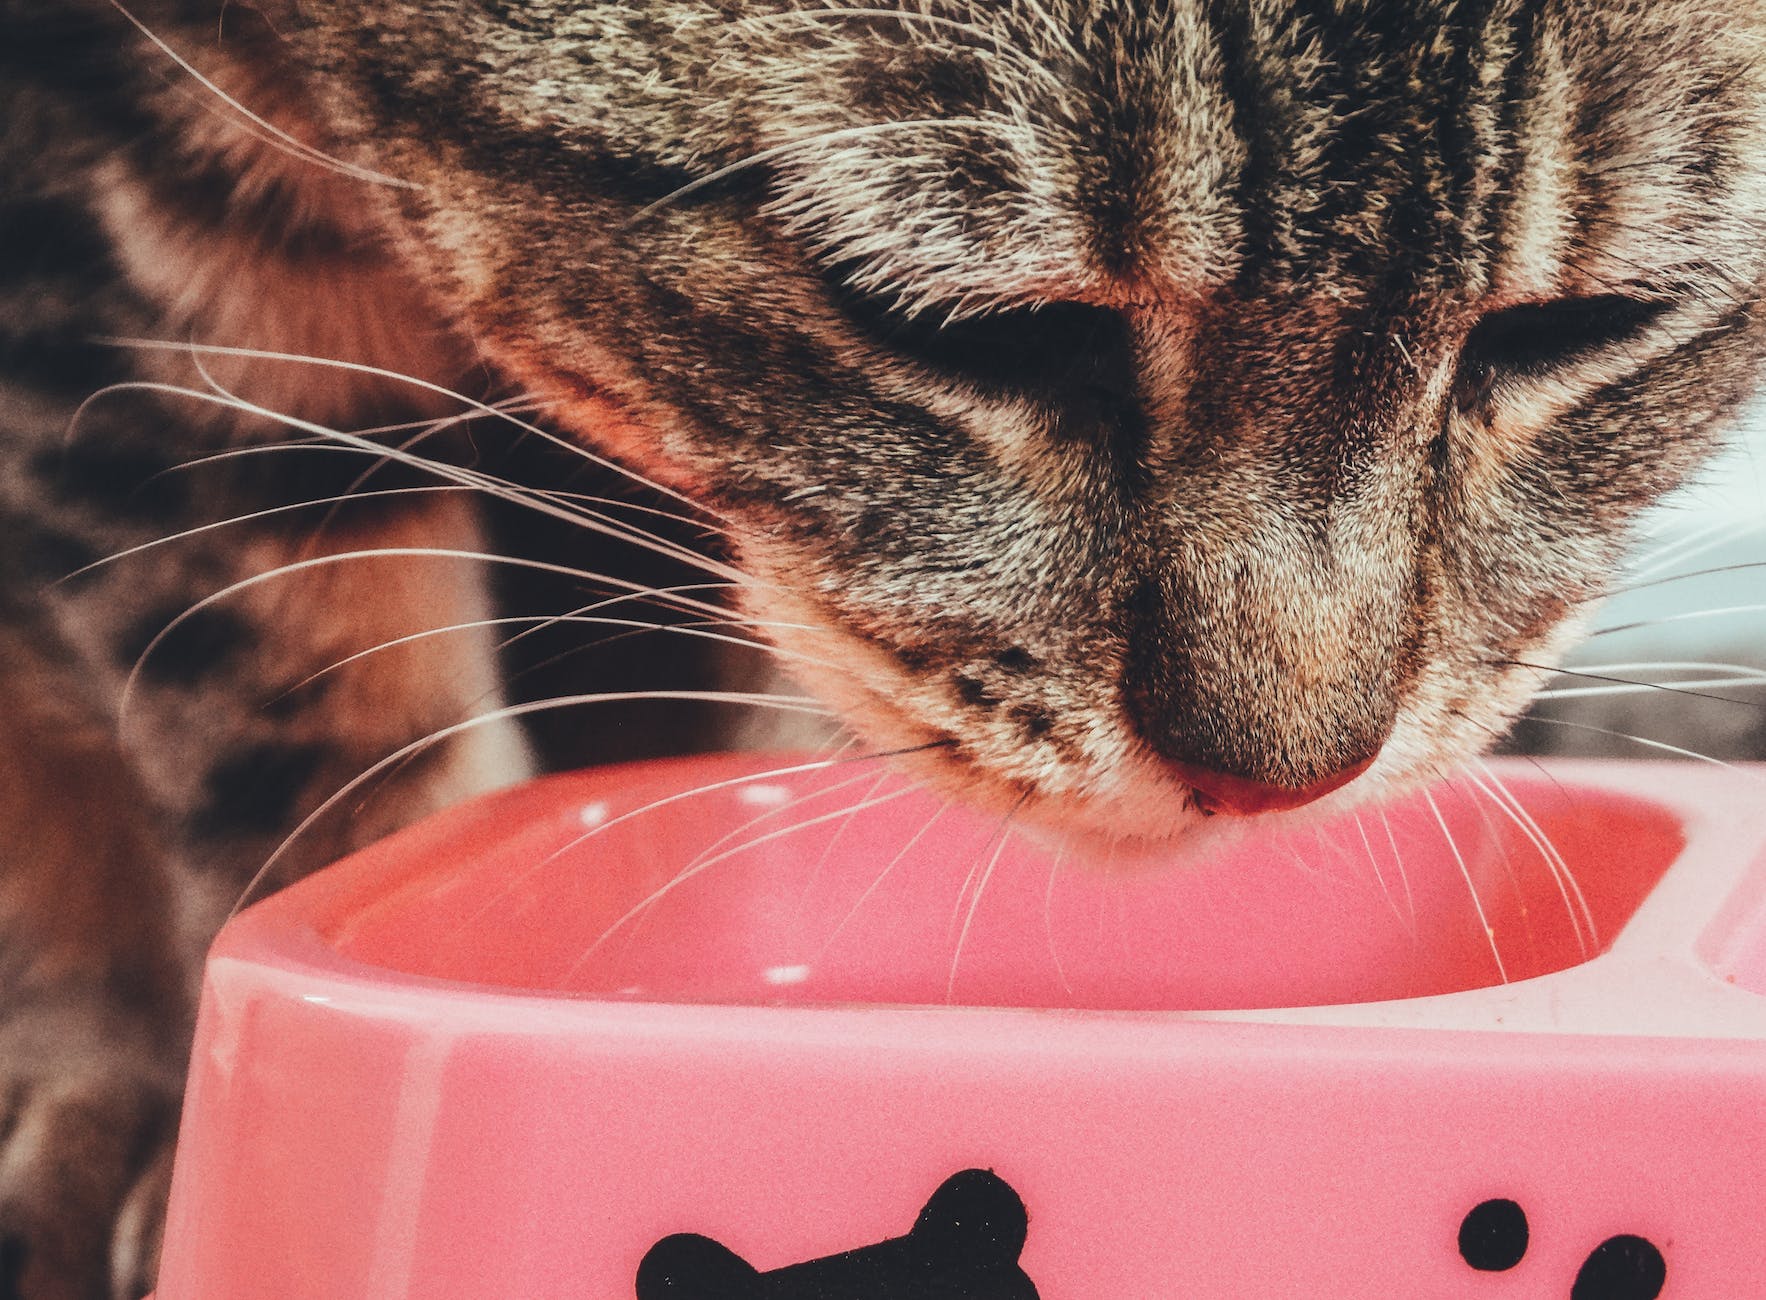 What Safe And Healthy Soft Foods Can Cats Eat?